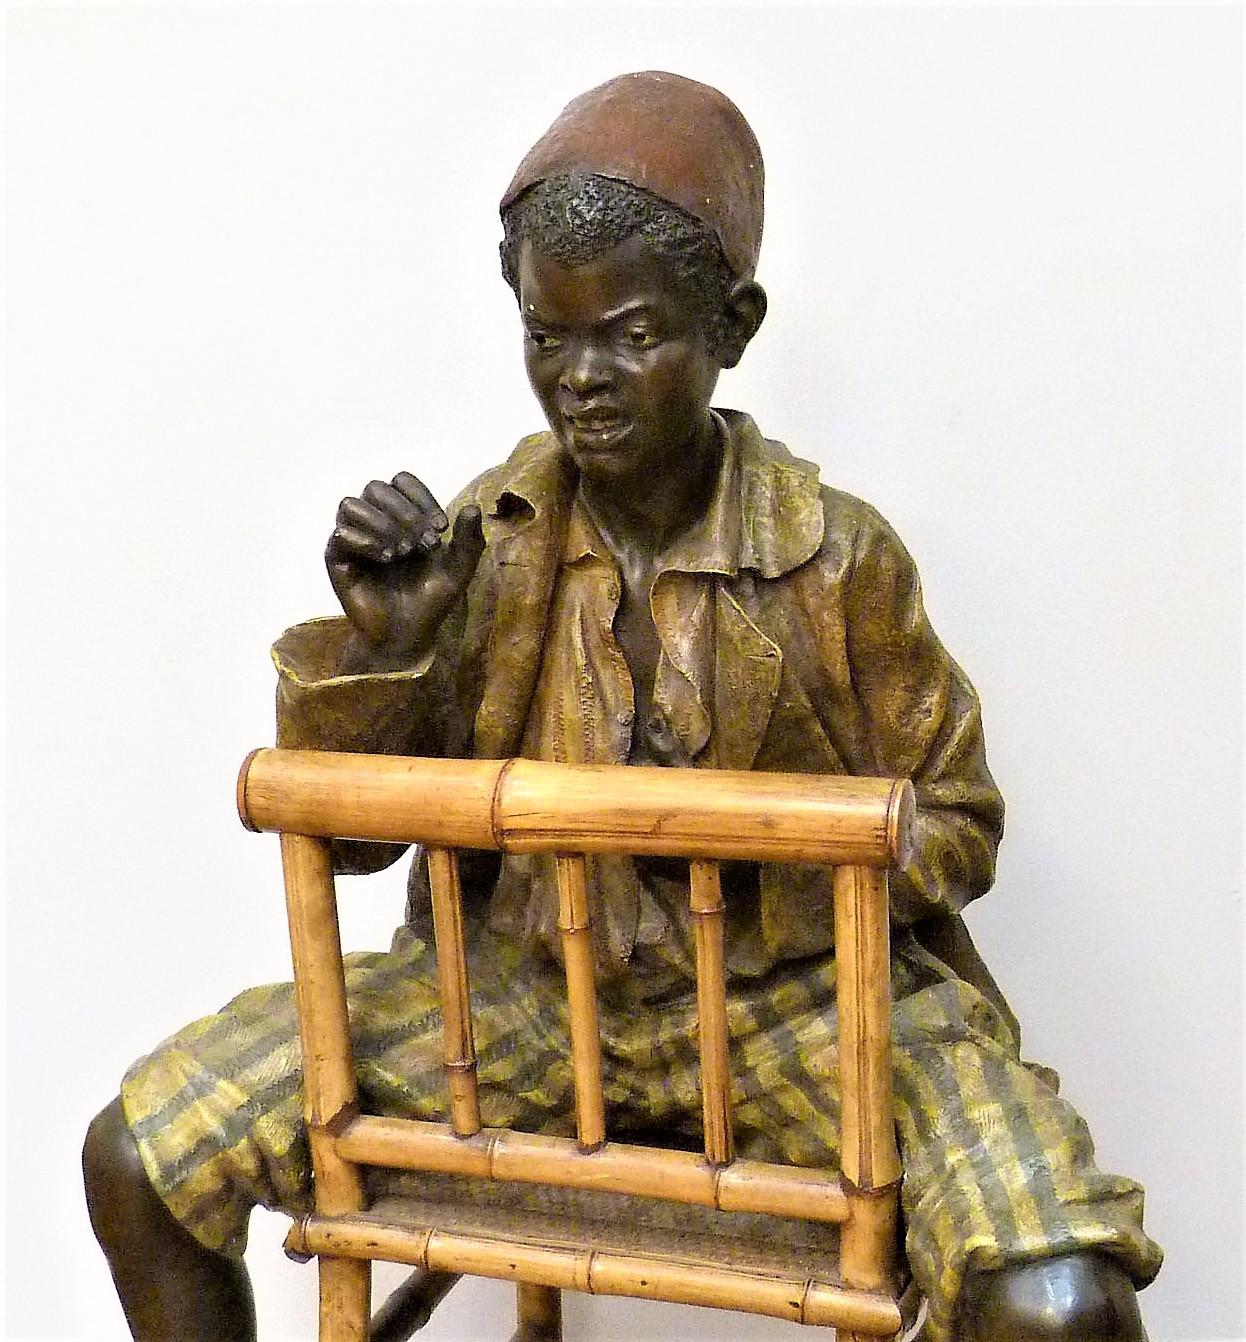 Very large polychrome terracotta decorated with a boy sitting astride a bamboo chair and basketry, numbered and monogrammed on the back. This sculpture is a feat of technicality and is found only exceptionally in this dimension, the editor has